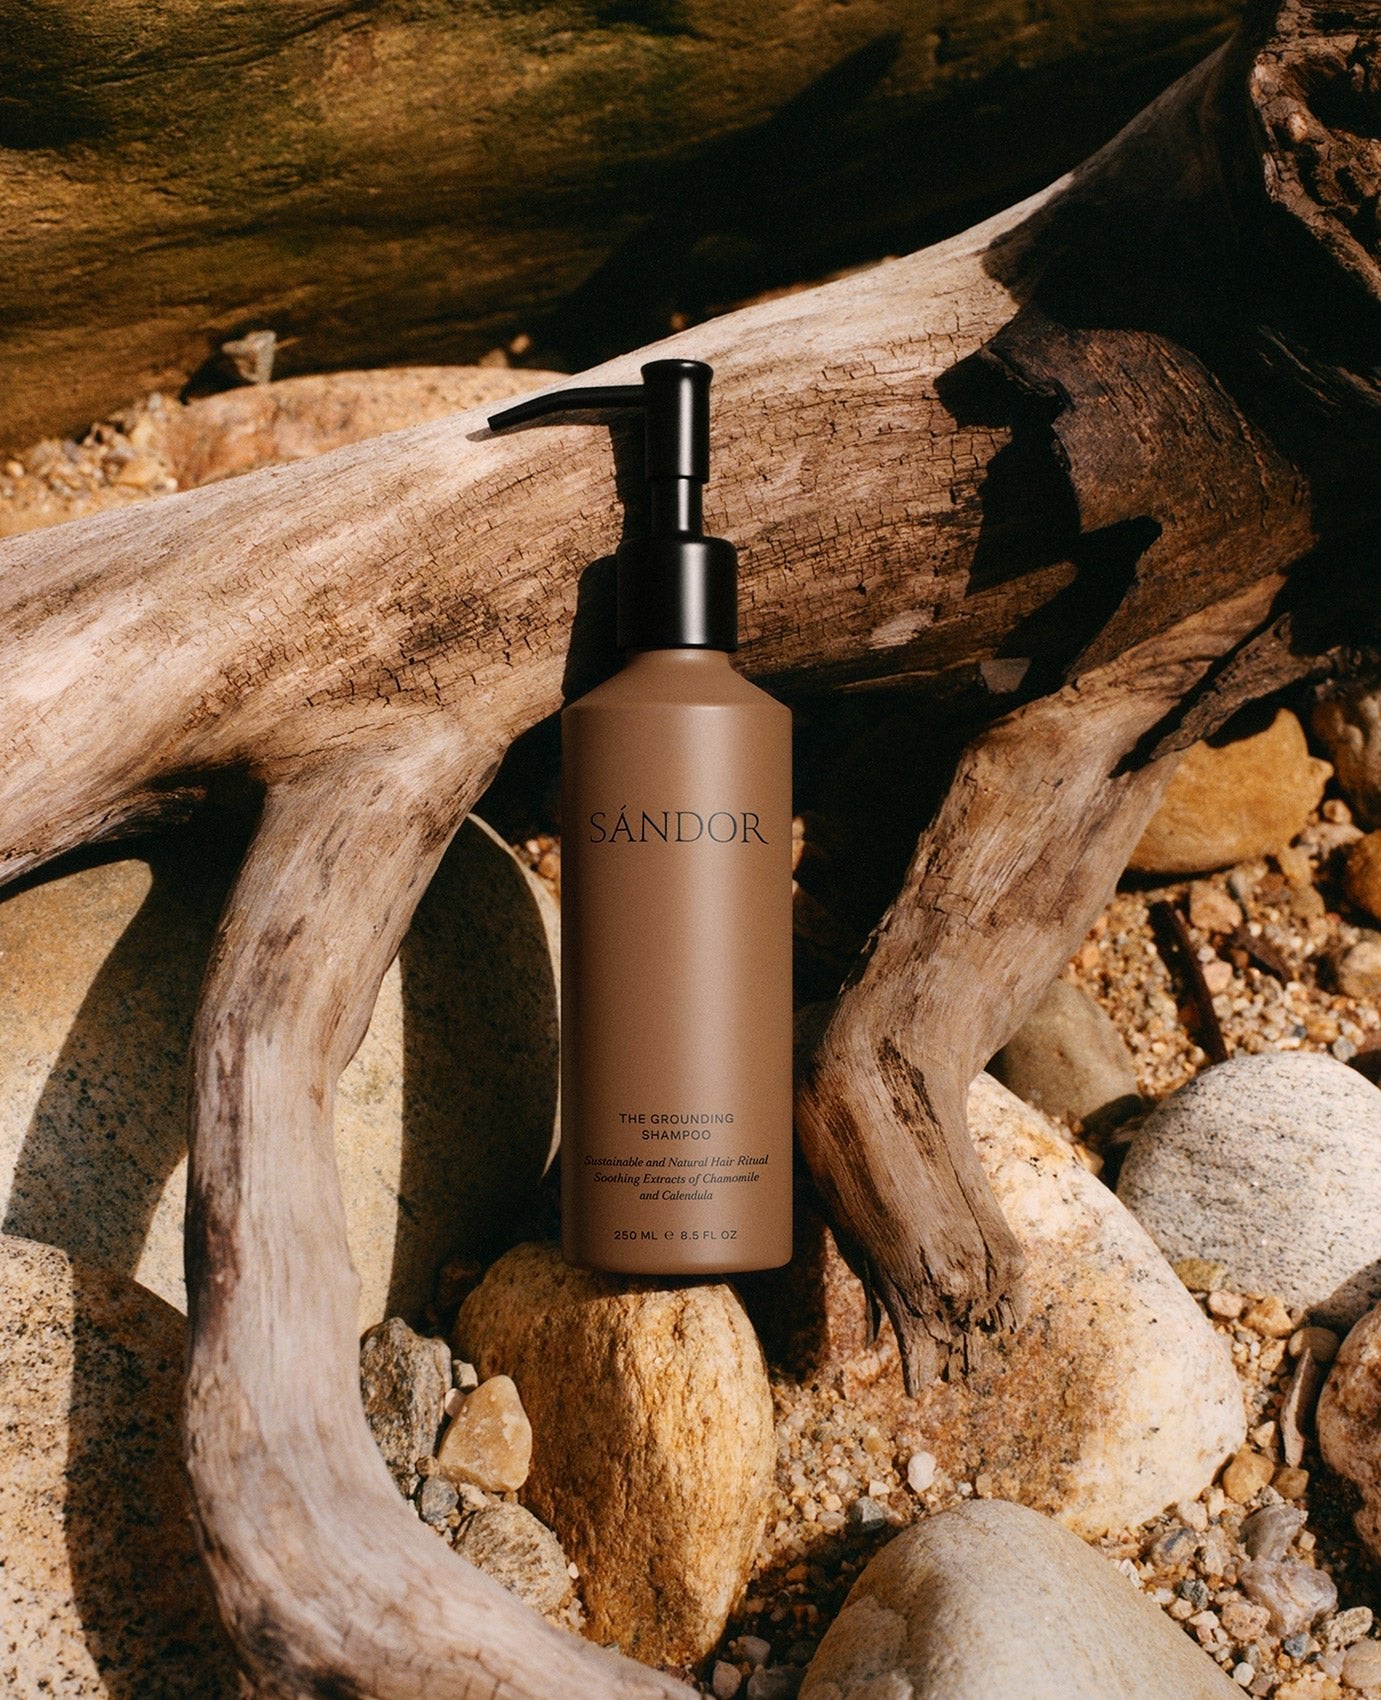 Product 4487462649915, Sandor Grounding shampoo reusable bottle with recyclable aluminum cap on ocean driftwood